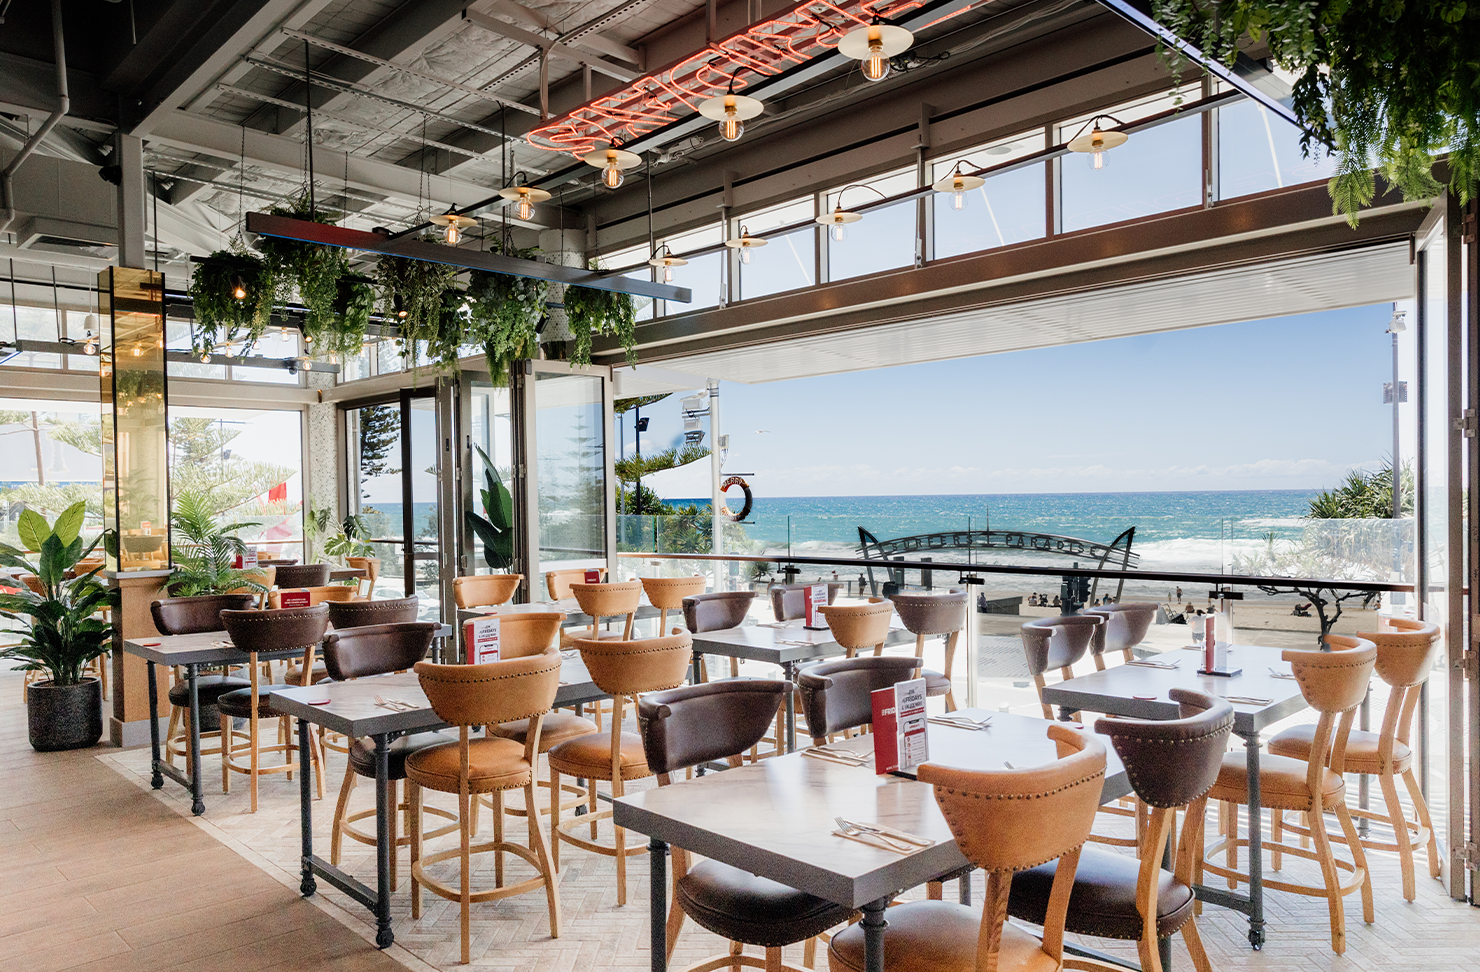 20 The Best Restaurants In Surfers Paradise To Visit In 2023 | Urban List Gold Coast